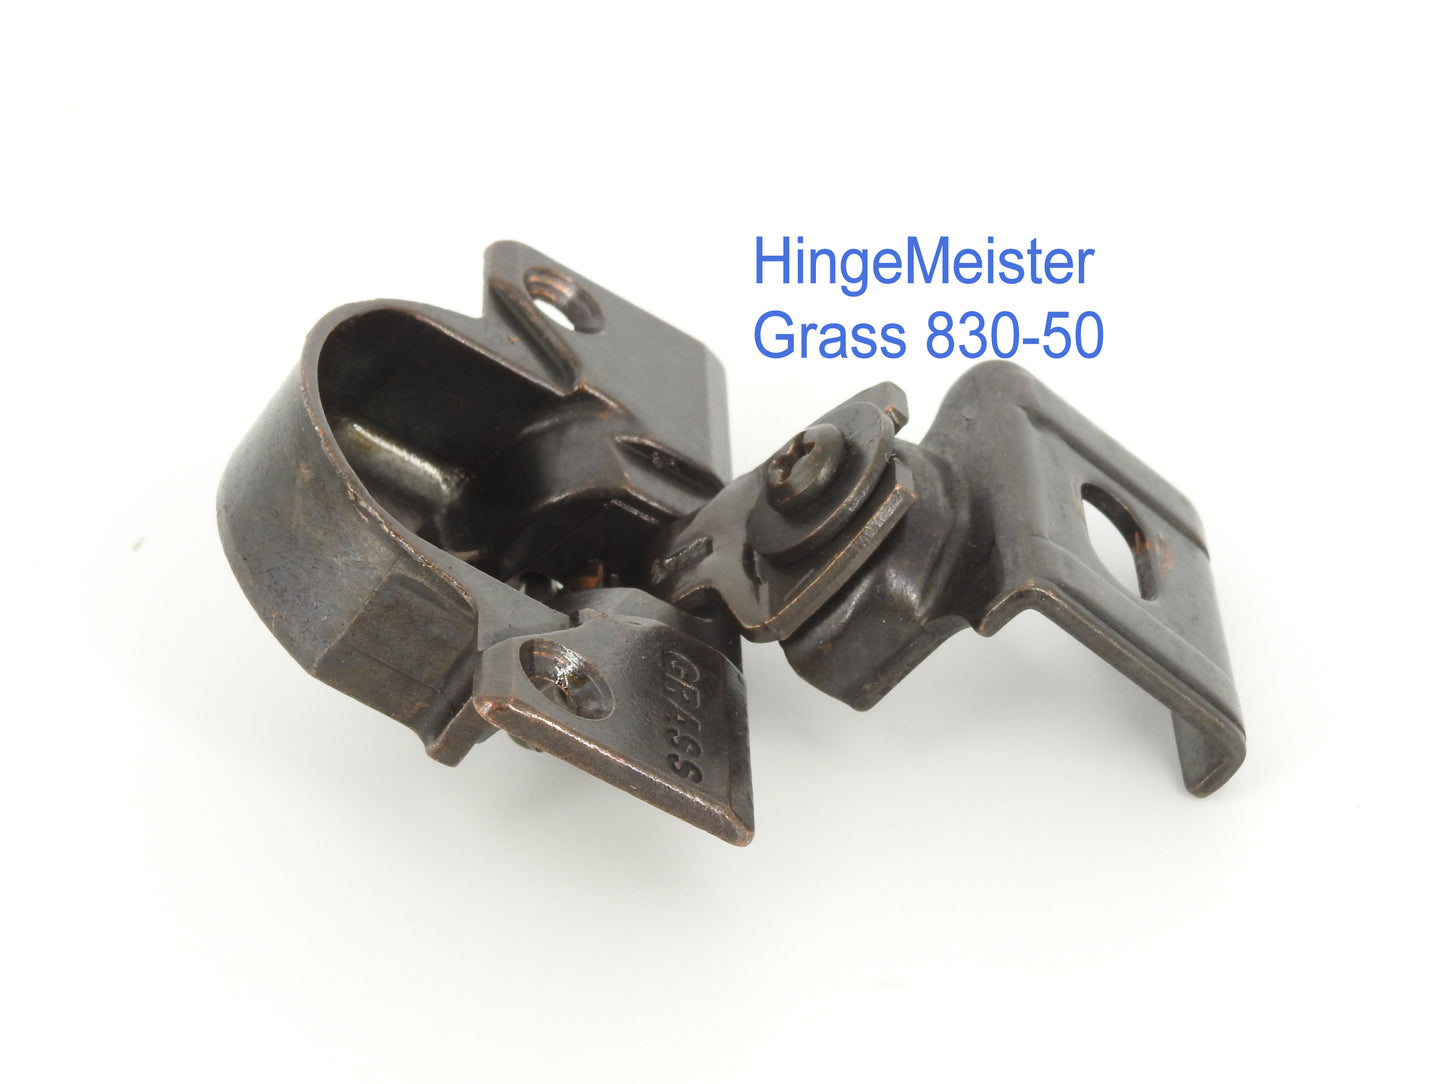 Grass 830-50 Bronze Hinge and mounting plate - Complete Hinge - Refurbished